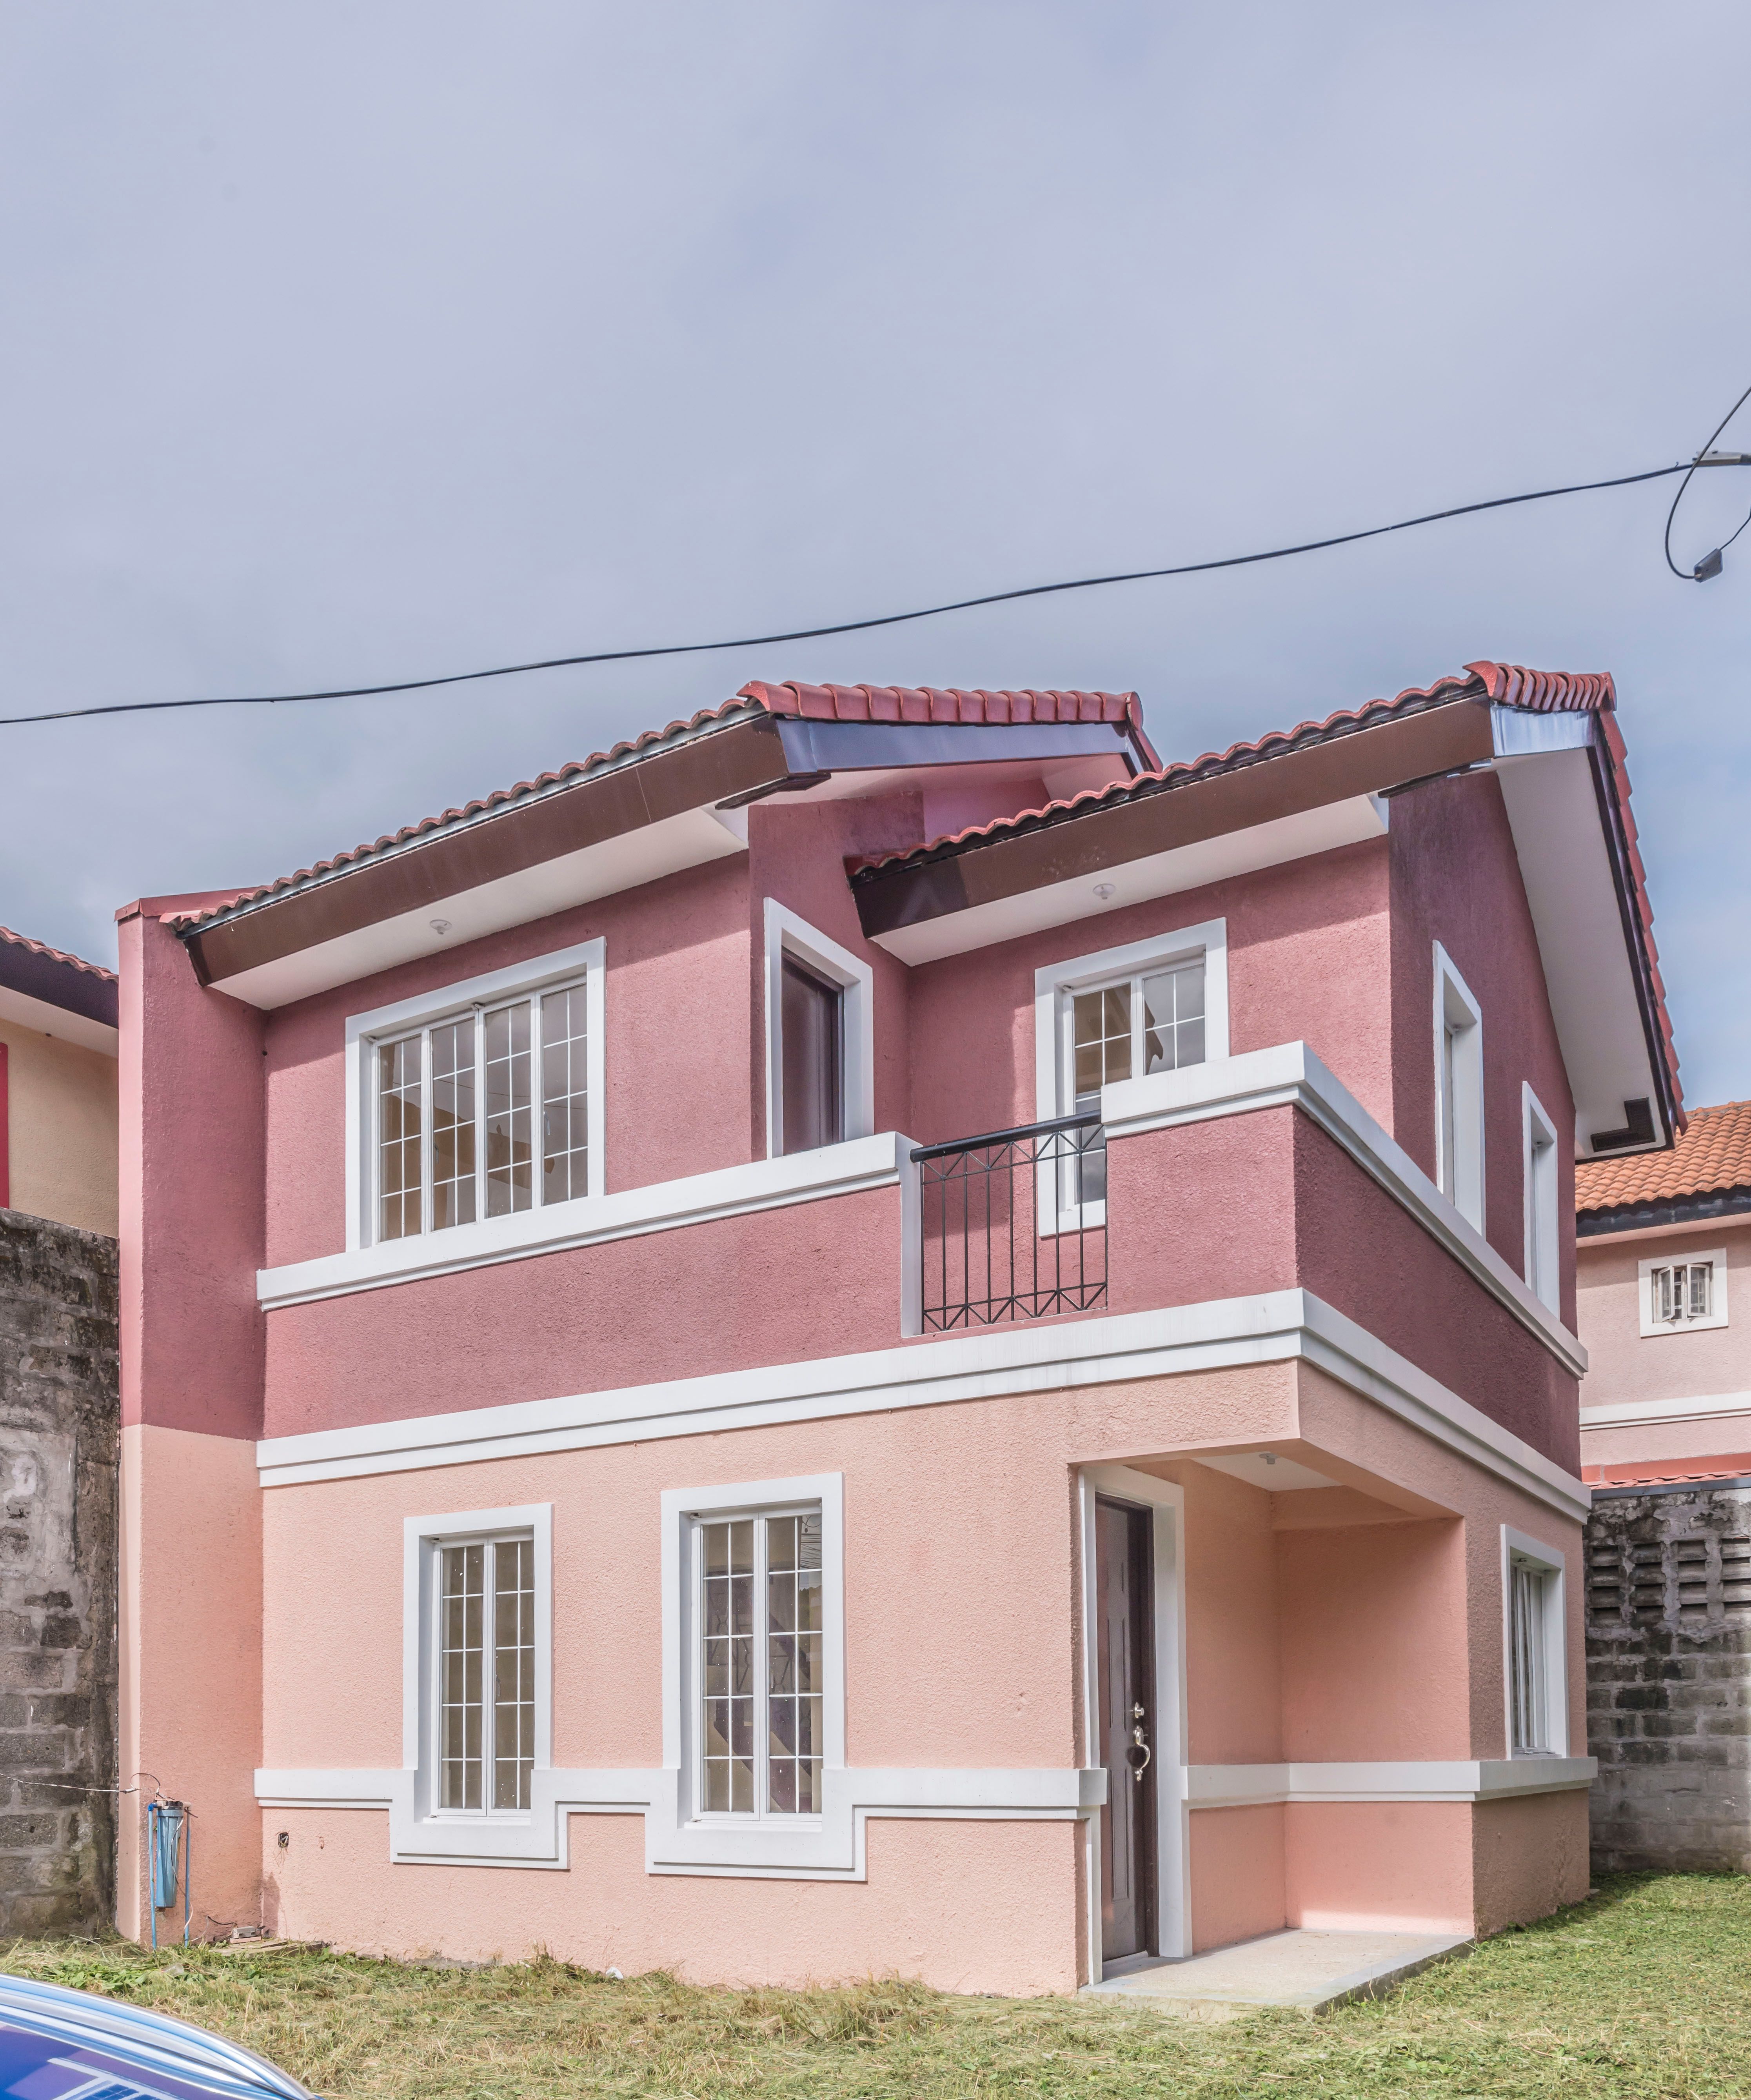 Private: Private: Private: Private: Private: Private: RFO 3 Bedroom House and Lot for sale in Imus, Cavite | Crown Asia Vivace